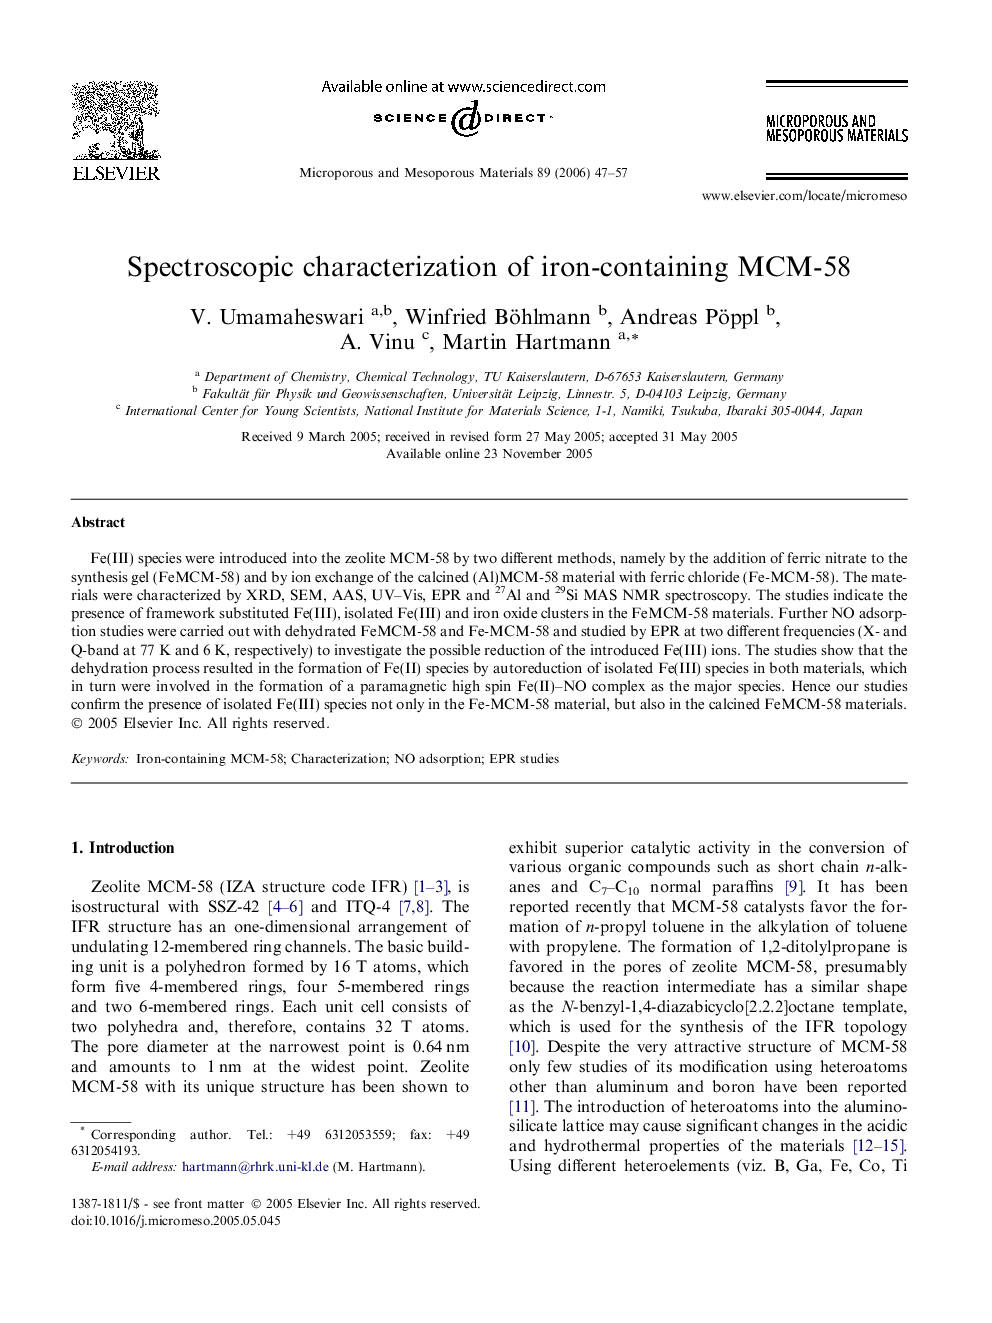 Spectroscopic characterization of iron-containing MCM-58